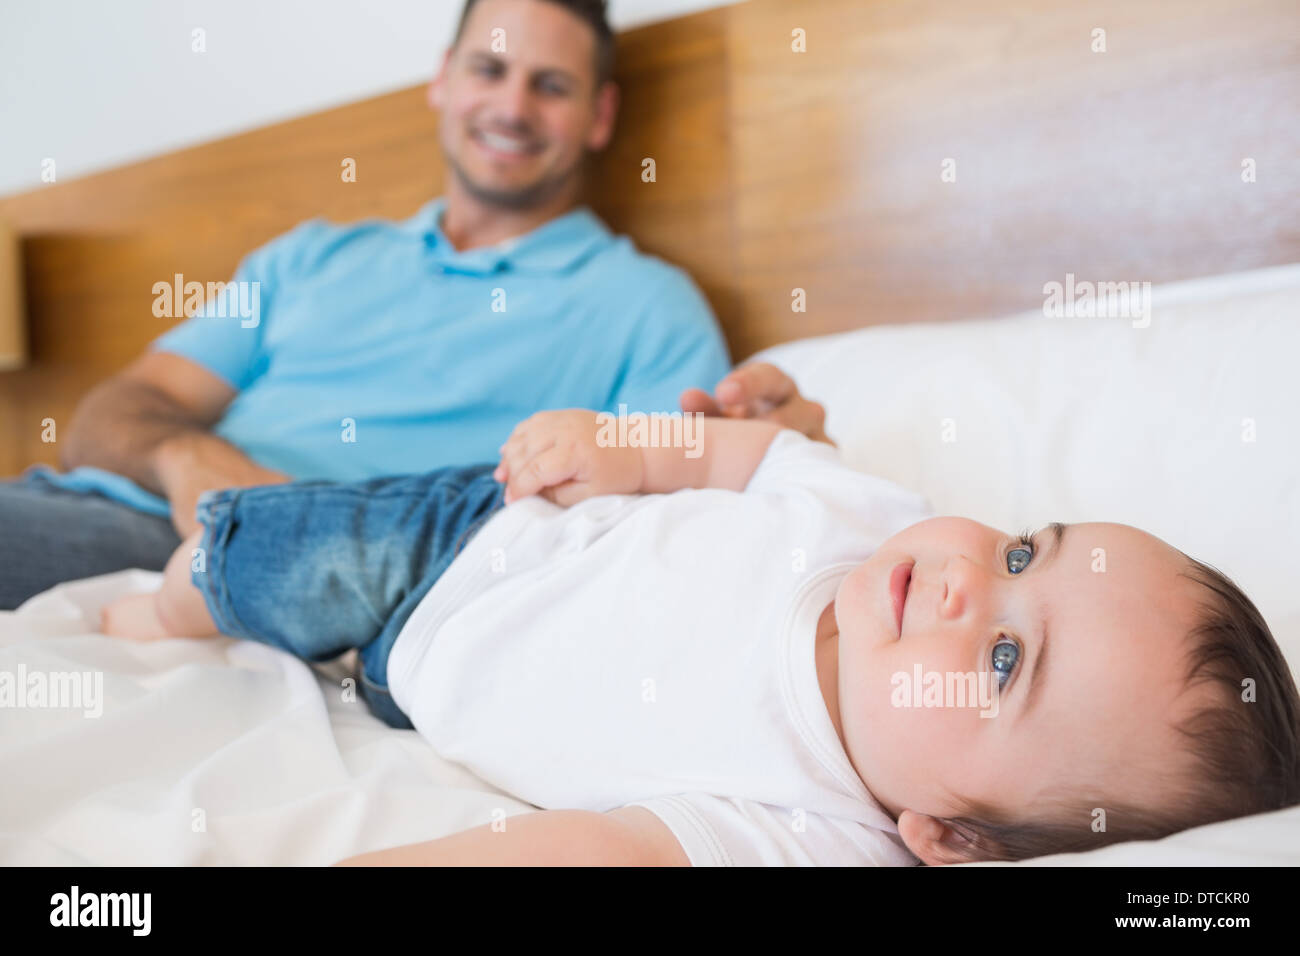 Smiling baby lying on bed Stock Photo